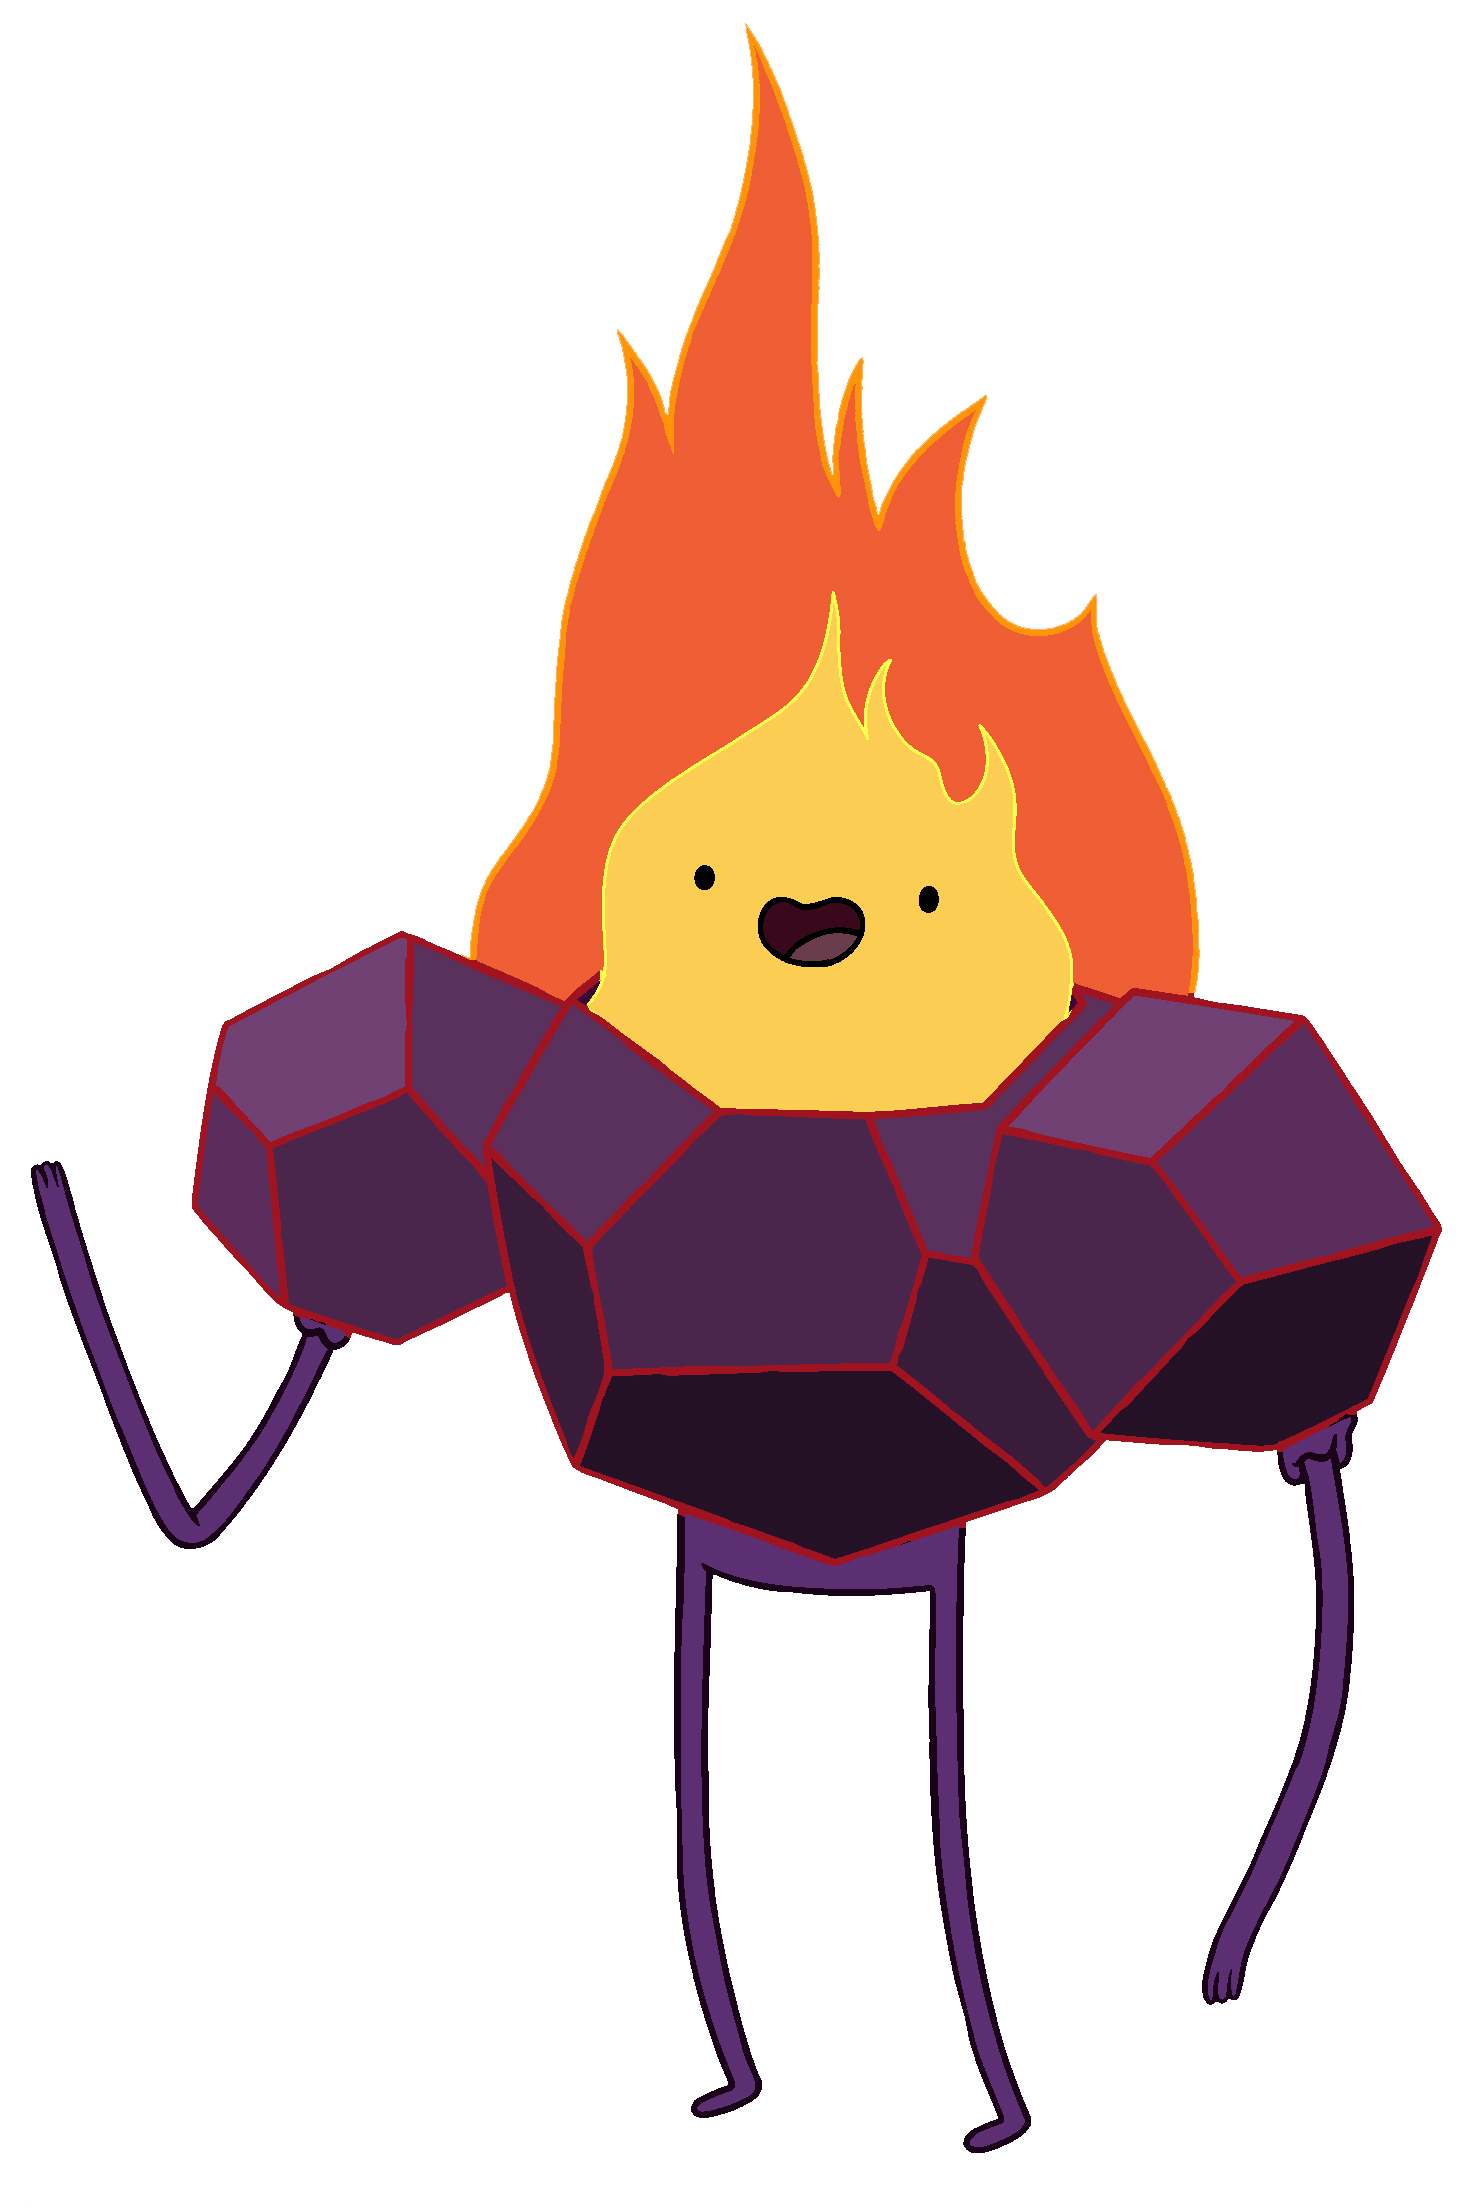 34, August 25, 2012 - Adventure Time Fire Characters (1458x2212)